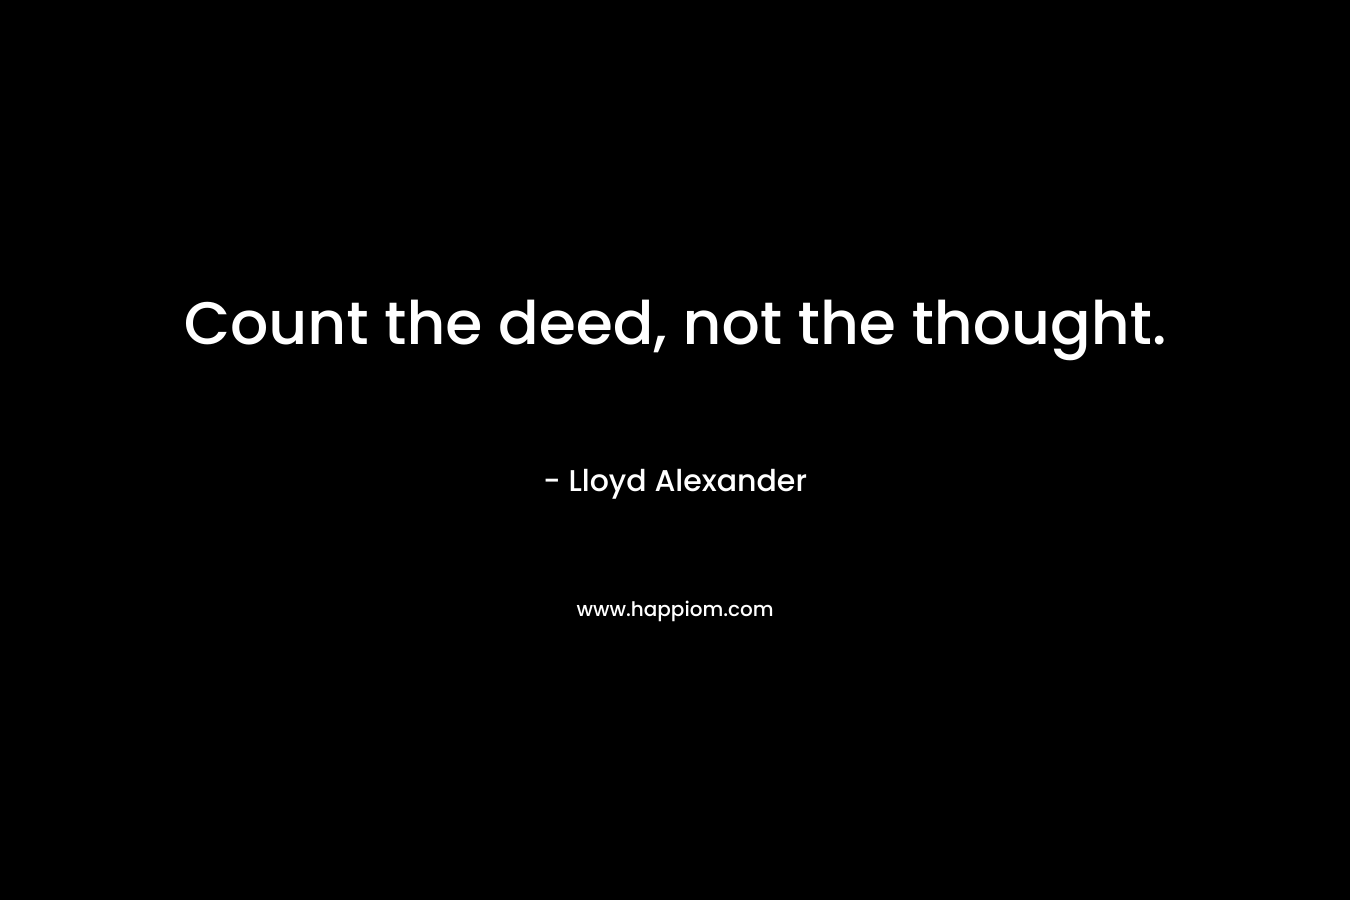 Count the deed, not the thought.